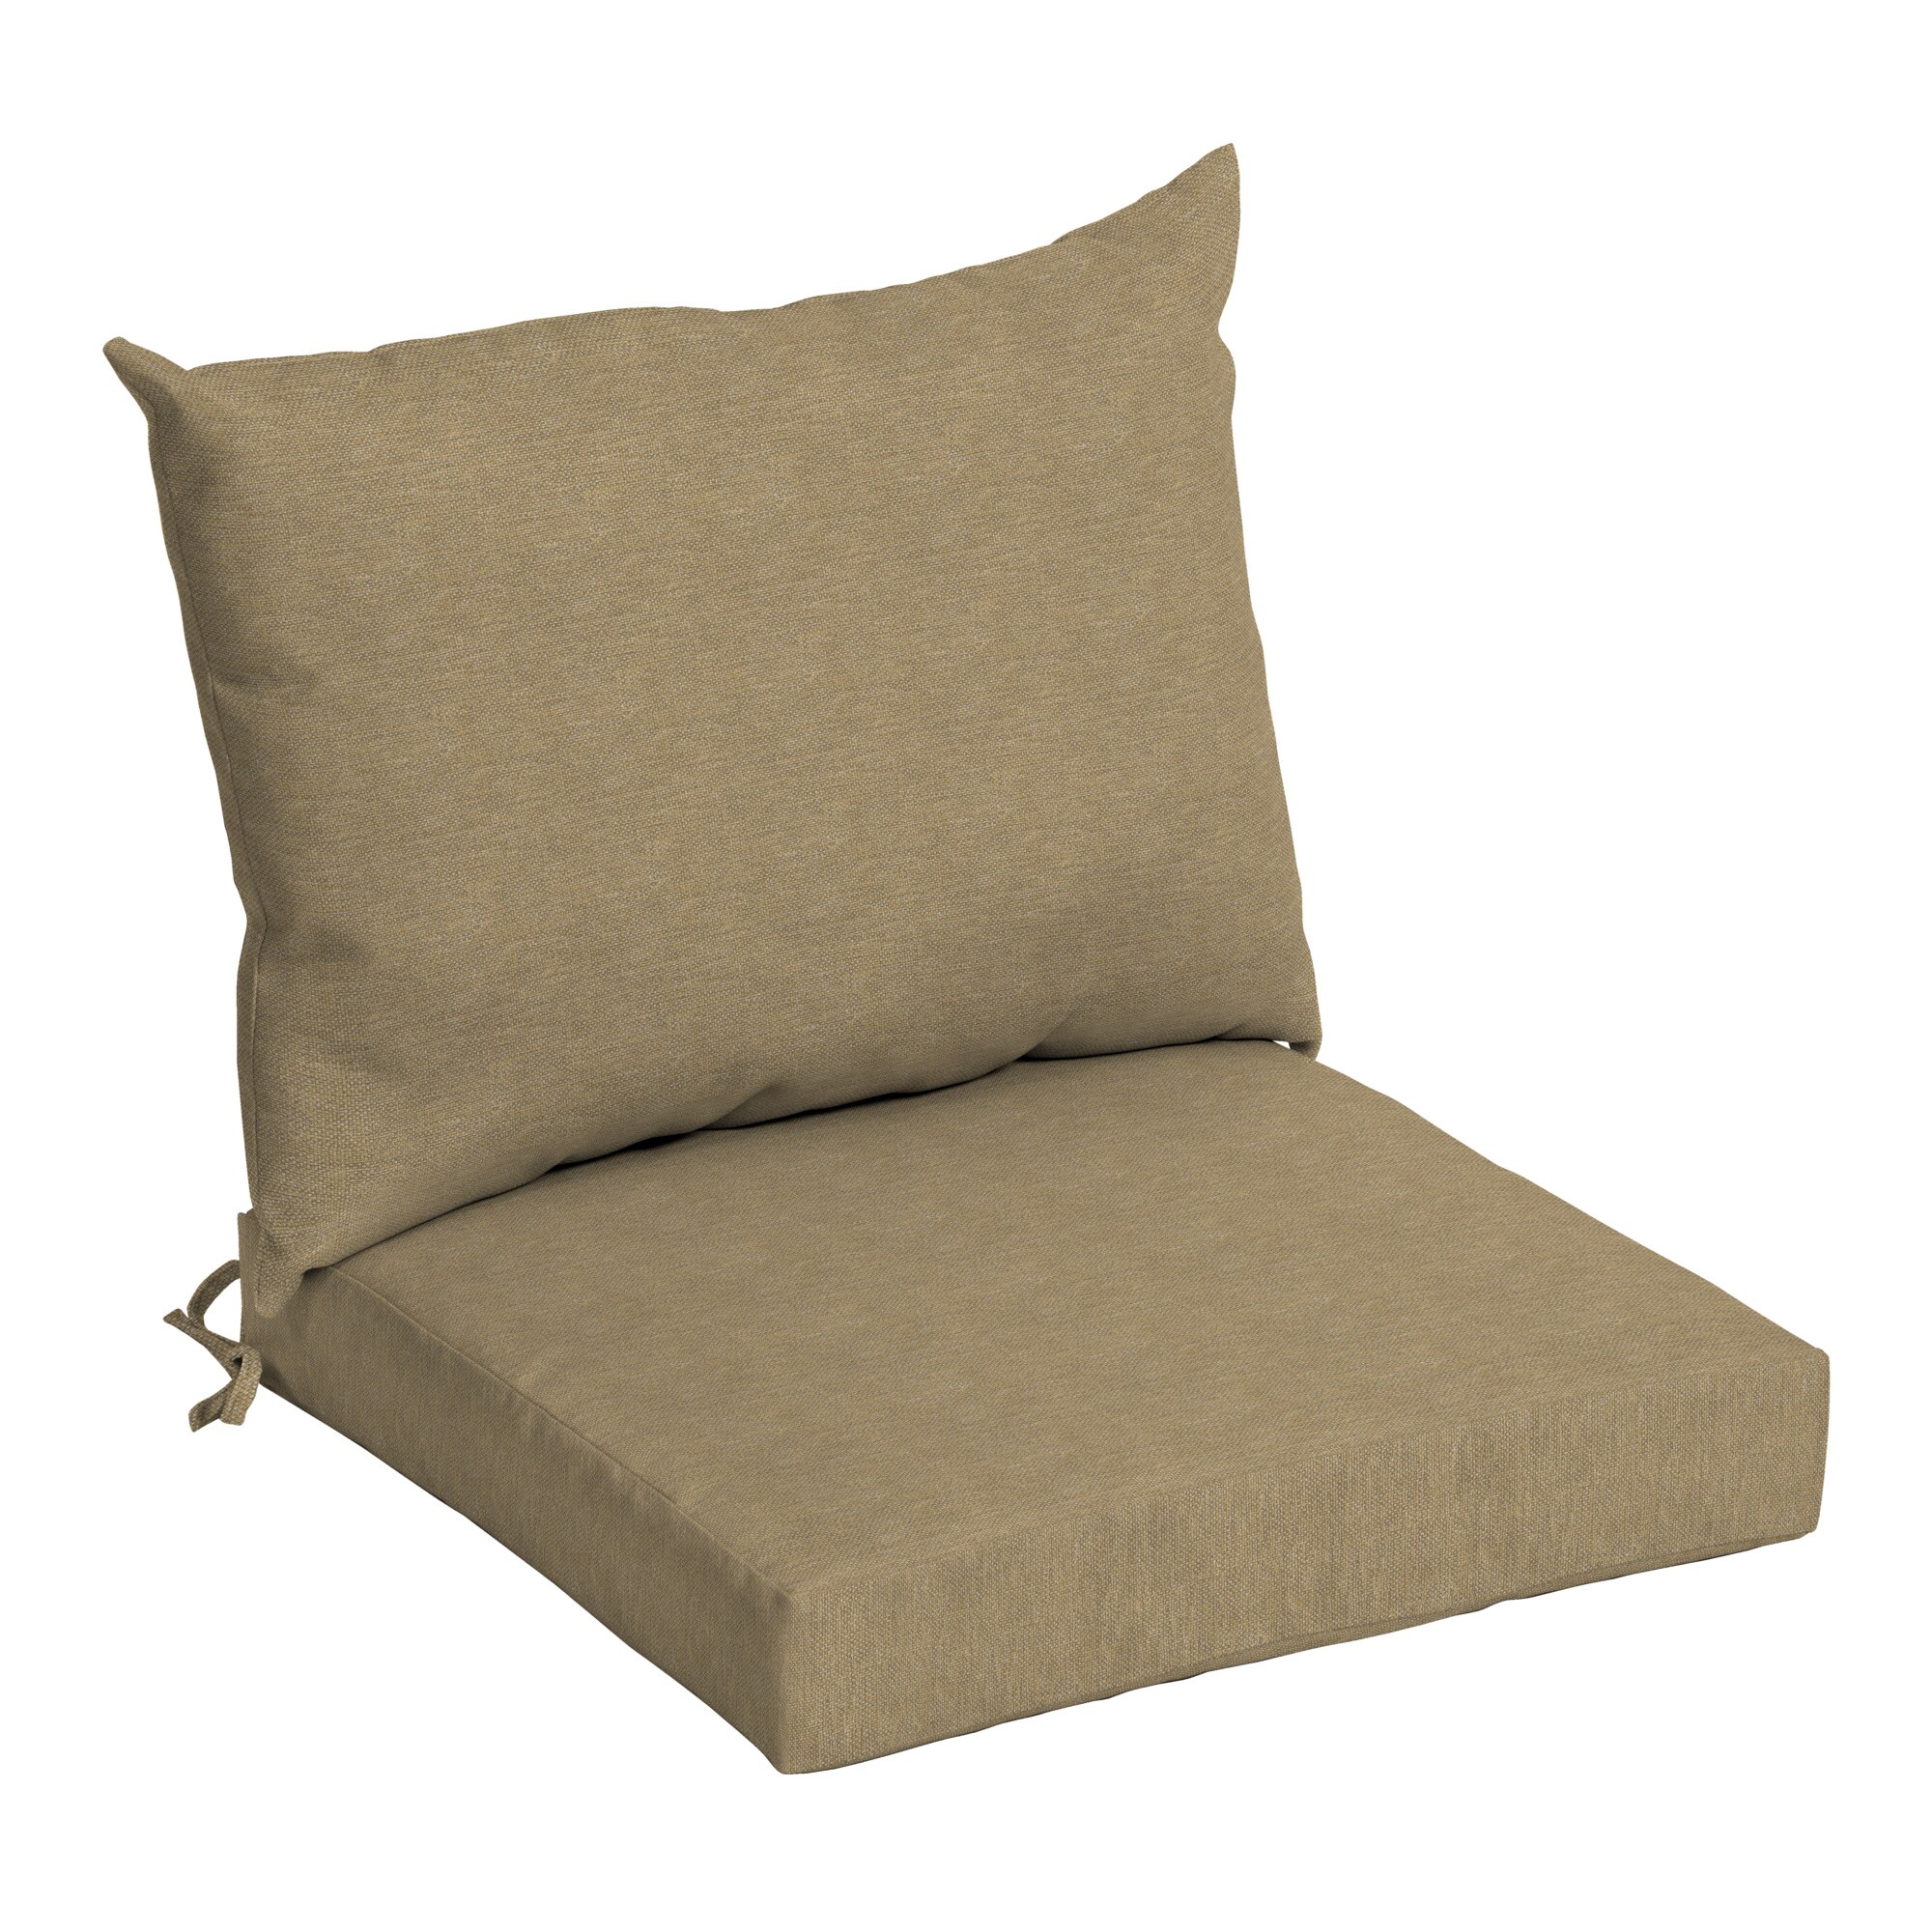 Solid Taupe Outdoor Patio Chair Deep Seat Cushion Set Hinged Seat Back 